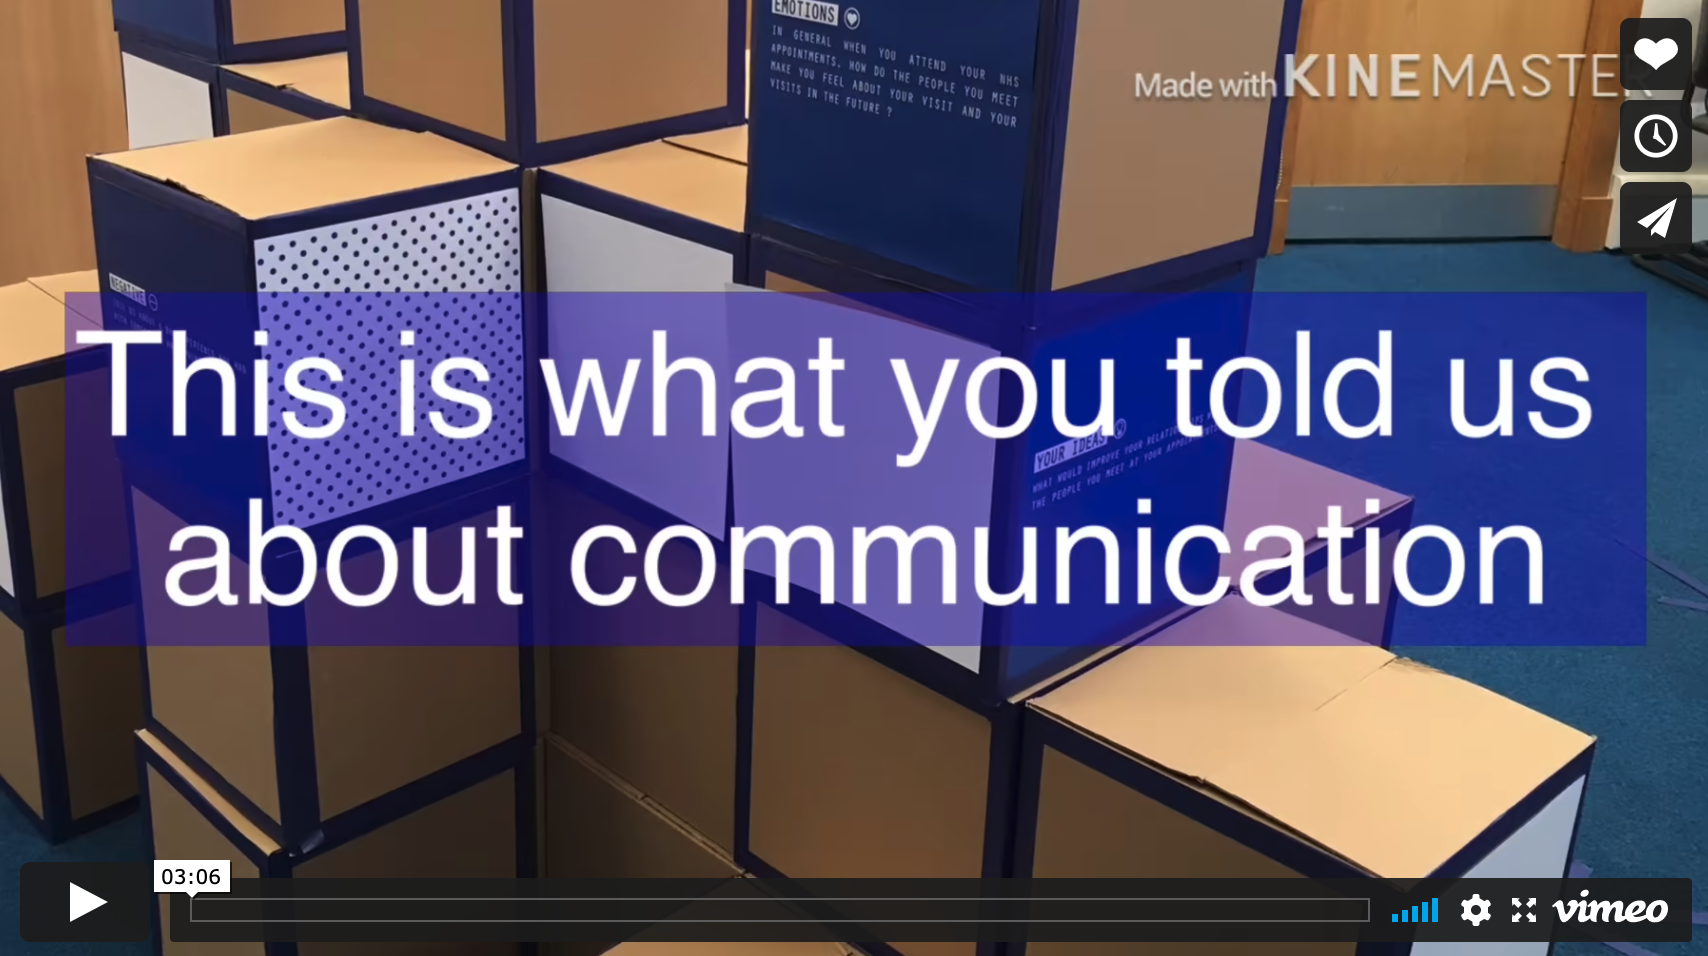 This is what you told us about communication